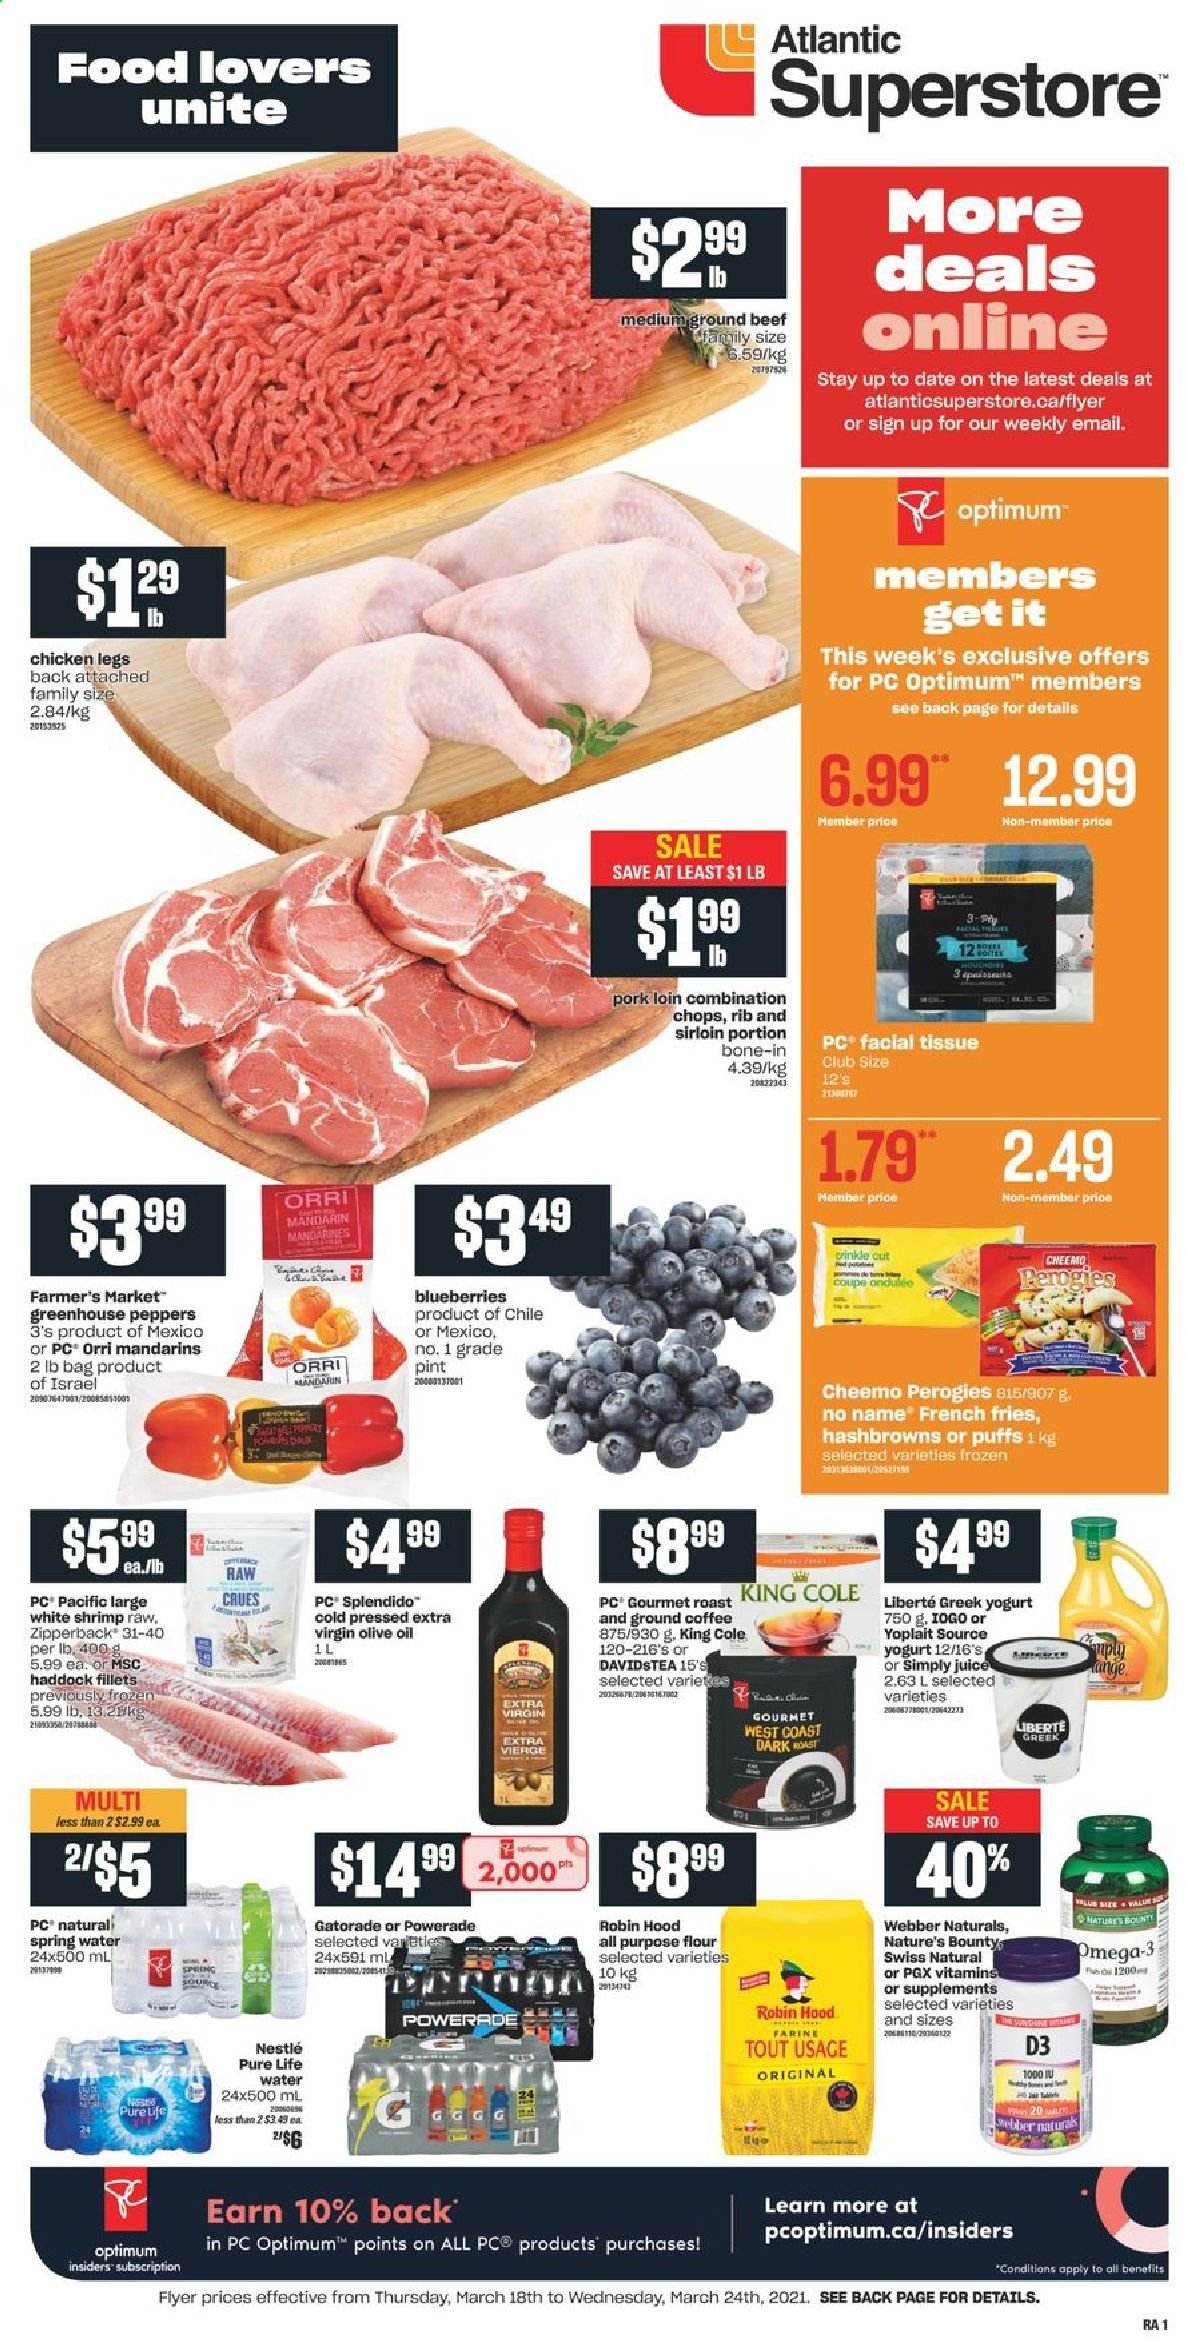 thumbnail - Atlantic Superstore Flyer - March 18, 2021 - March 24, 2021 - Sales products - puffs, peppers, blueberries, mandarines, haddock, shrimps, No Name, greek yoghurt, yoghurt, Yoplait, hash browns, potato fries, french fries, all purpose flour, flour, extra virgin olive oil, olive oil, oil, Powerade, juice, Gatorade, spring water, Pure Life Water, coffee, ground coffee, chicken legs, chicken, beef meat, ground beef, pork loin, pork meat, tissues, bag, Optimum, Nature's Bounty, Omega-3, vitamin D3, Nestlé. Page 1.